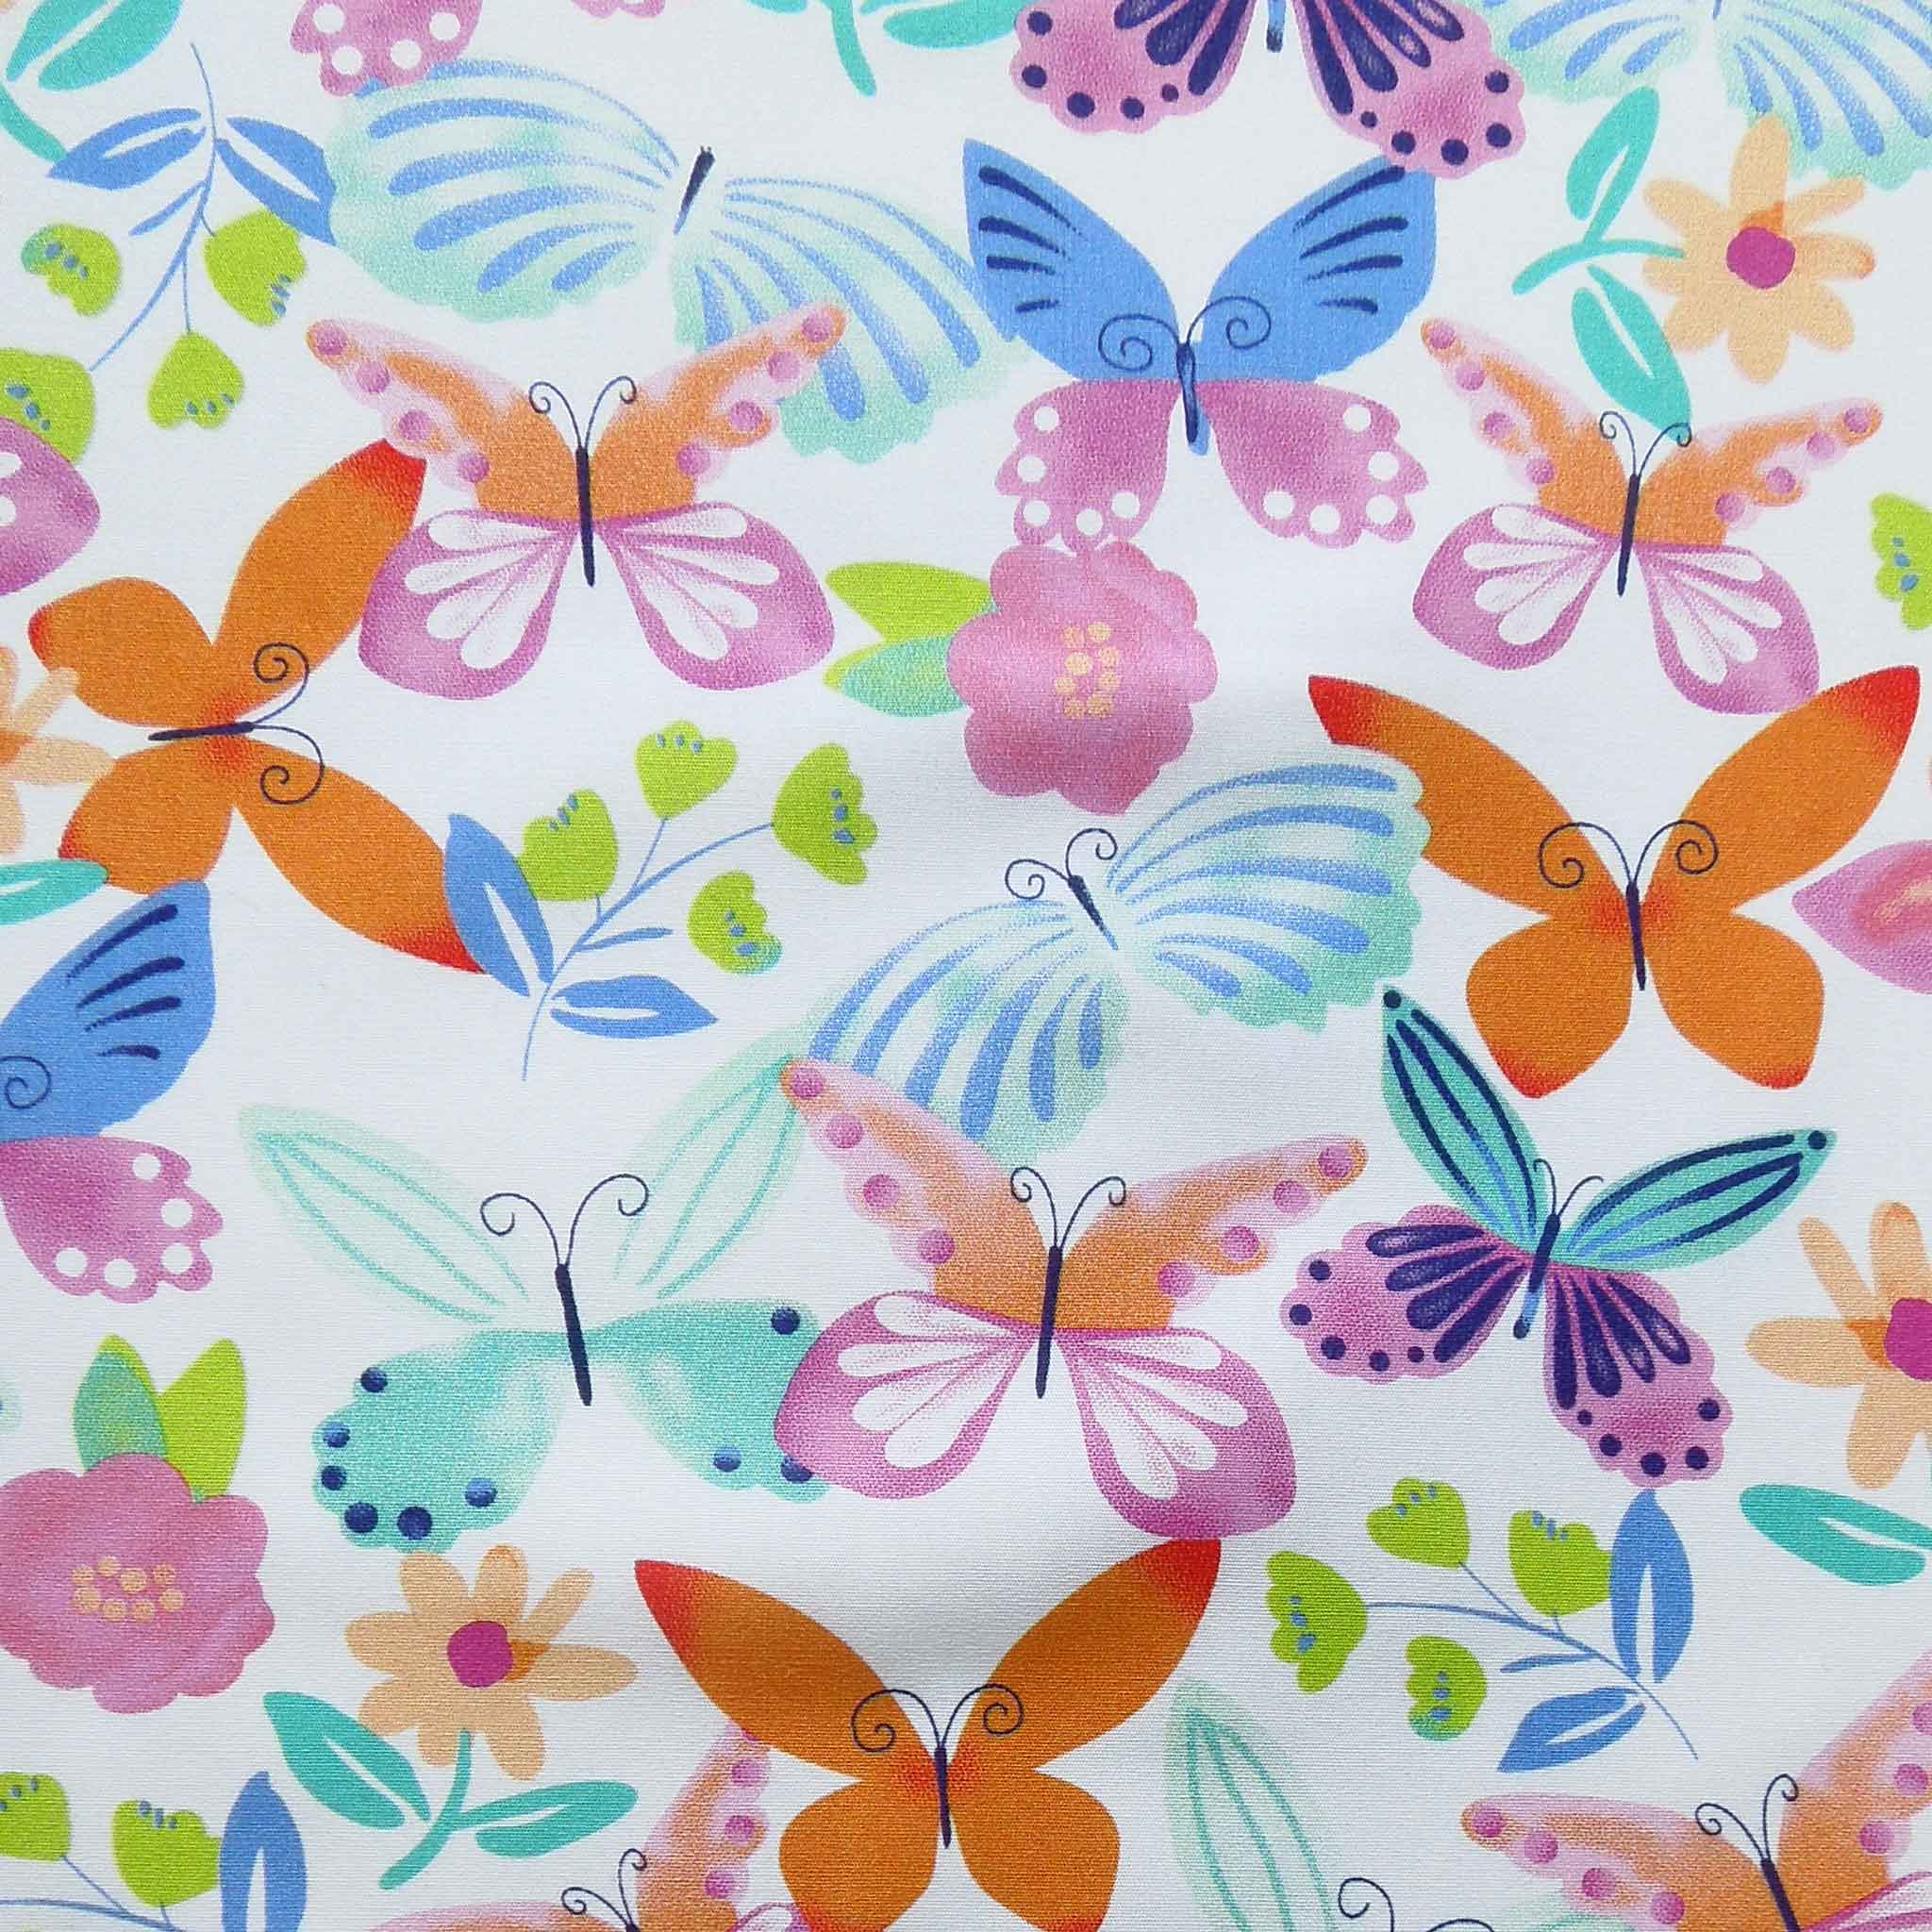 Pastel Coloured Butterfly Fabric, Multicoloured Butterflies Cotton Fabric for Patchwork and Crafts